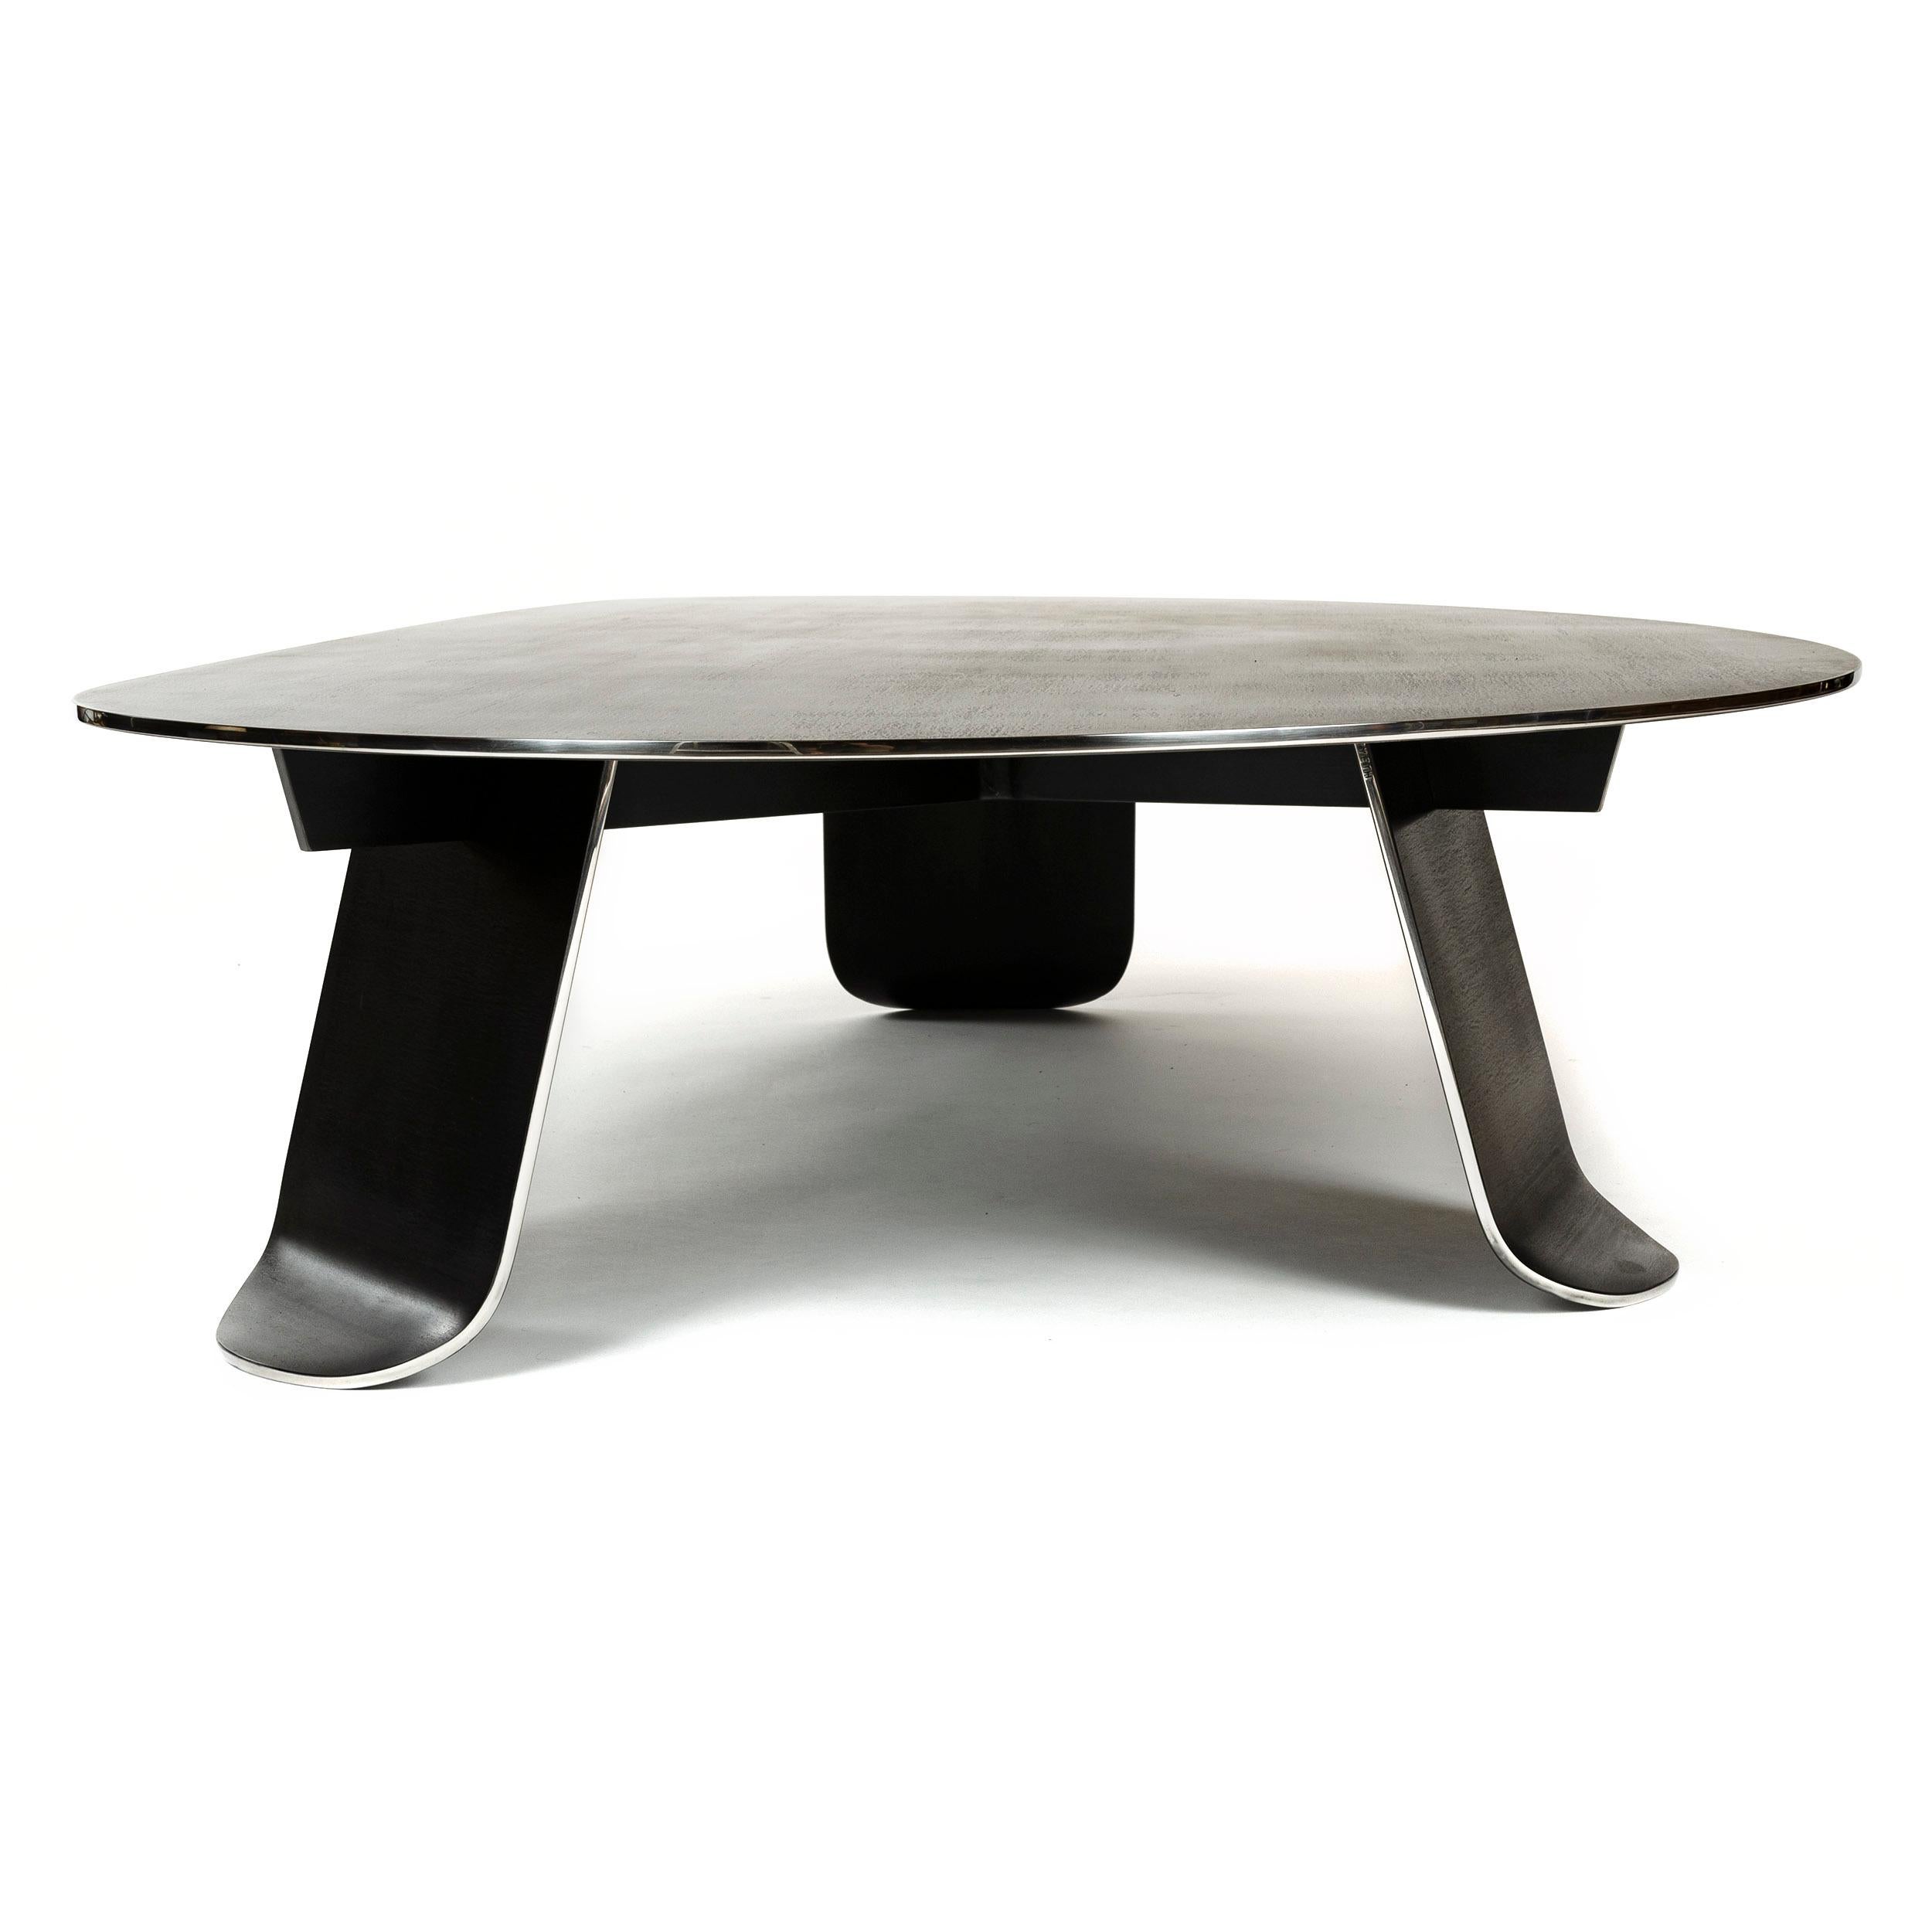 Wyeth Chrysalis Table No. 1 in Blackened Stainless Steel with Polished Edges For Sale 3